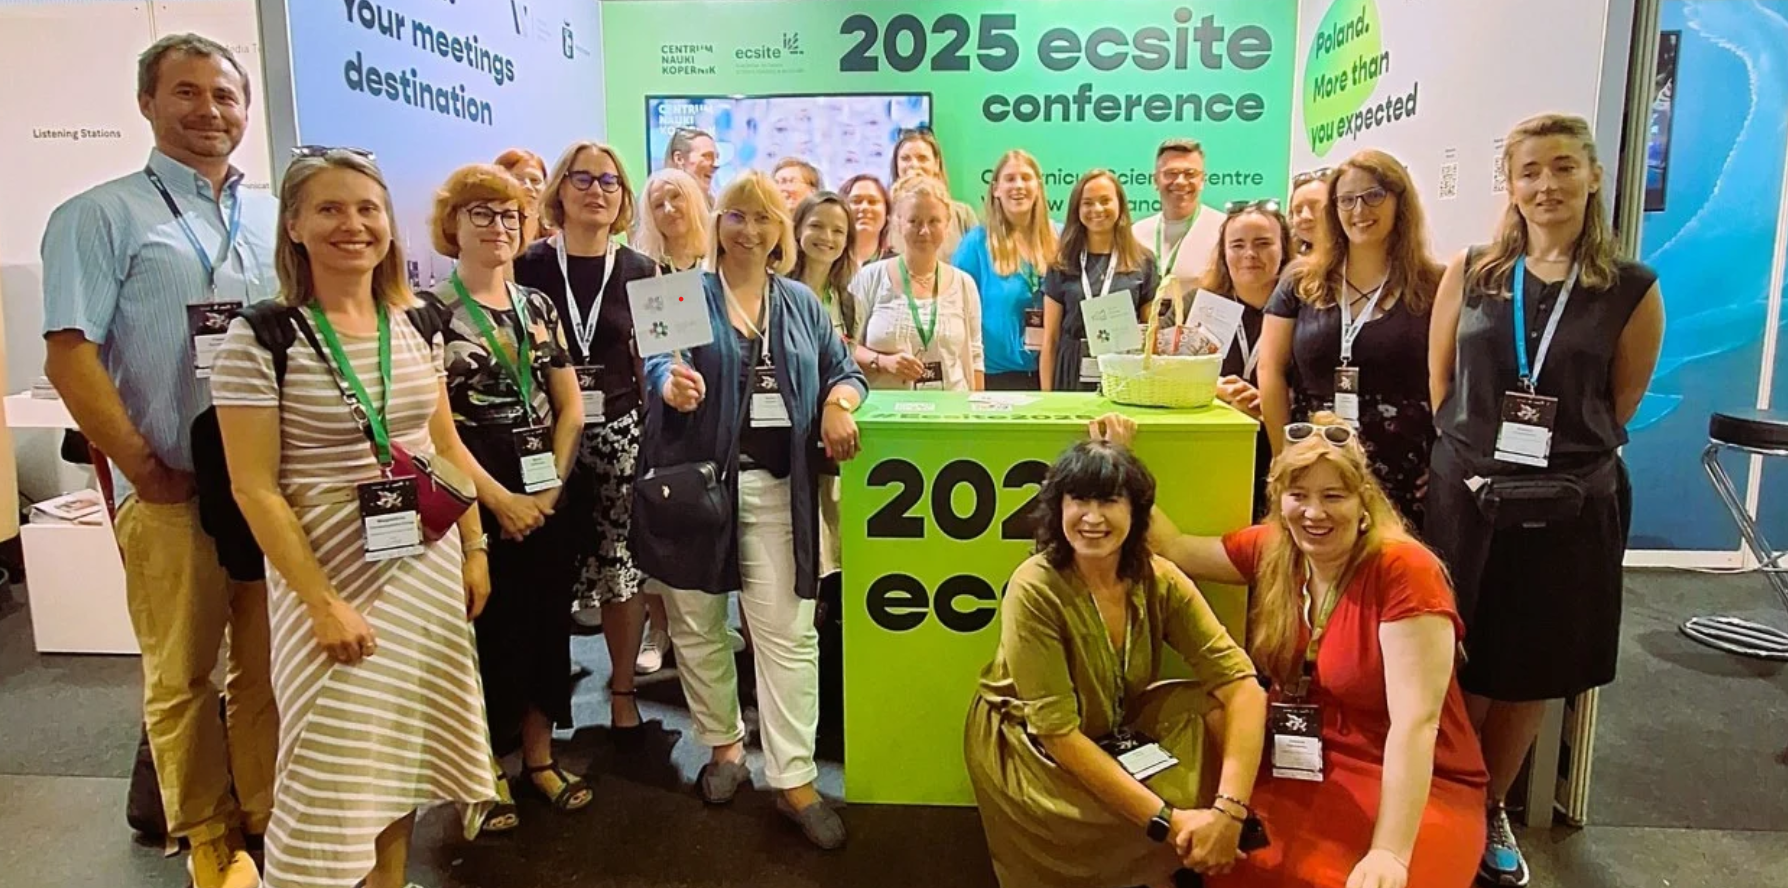 Poland and Warsaw Promoted at the Ecsite 2024 Congress in Ljubljana